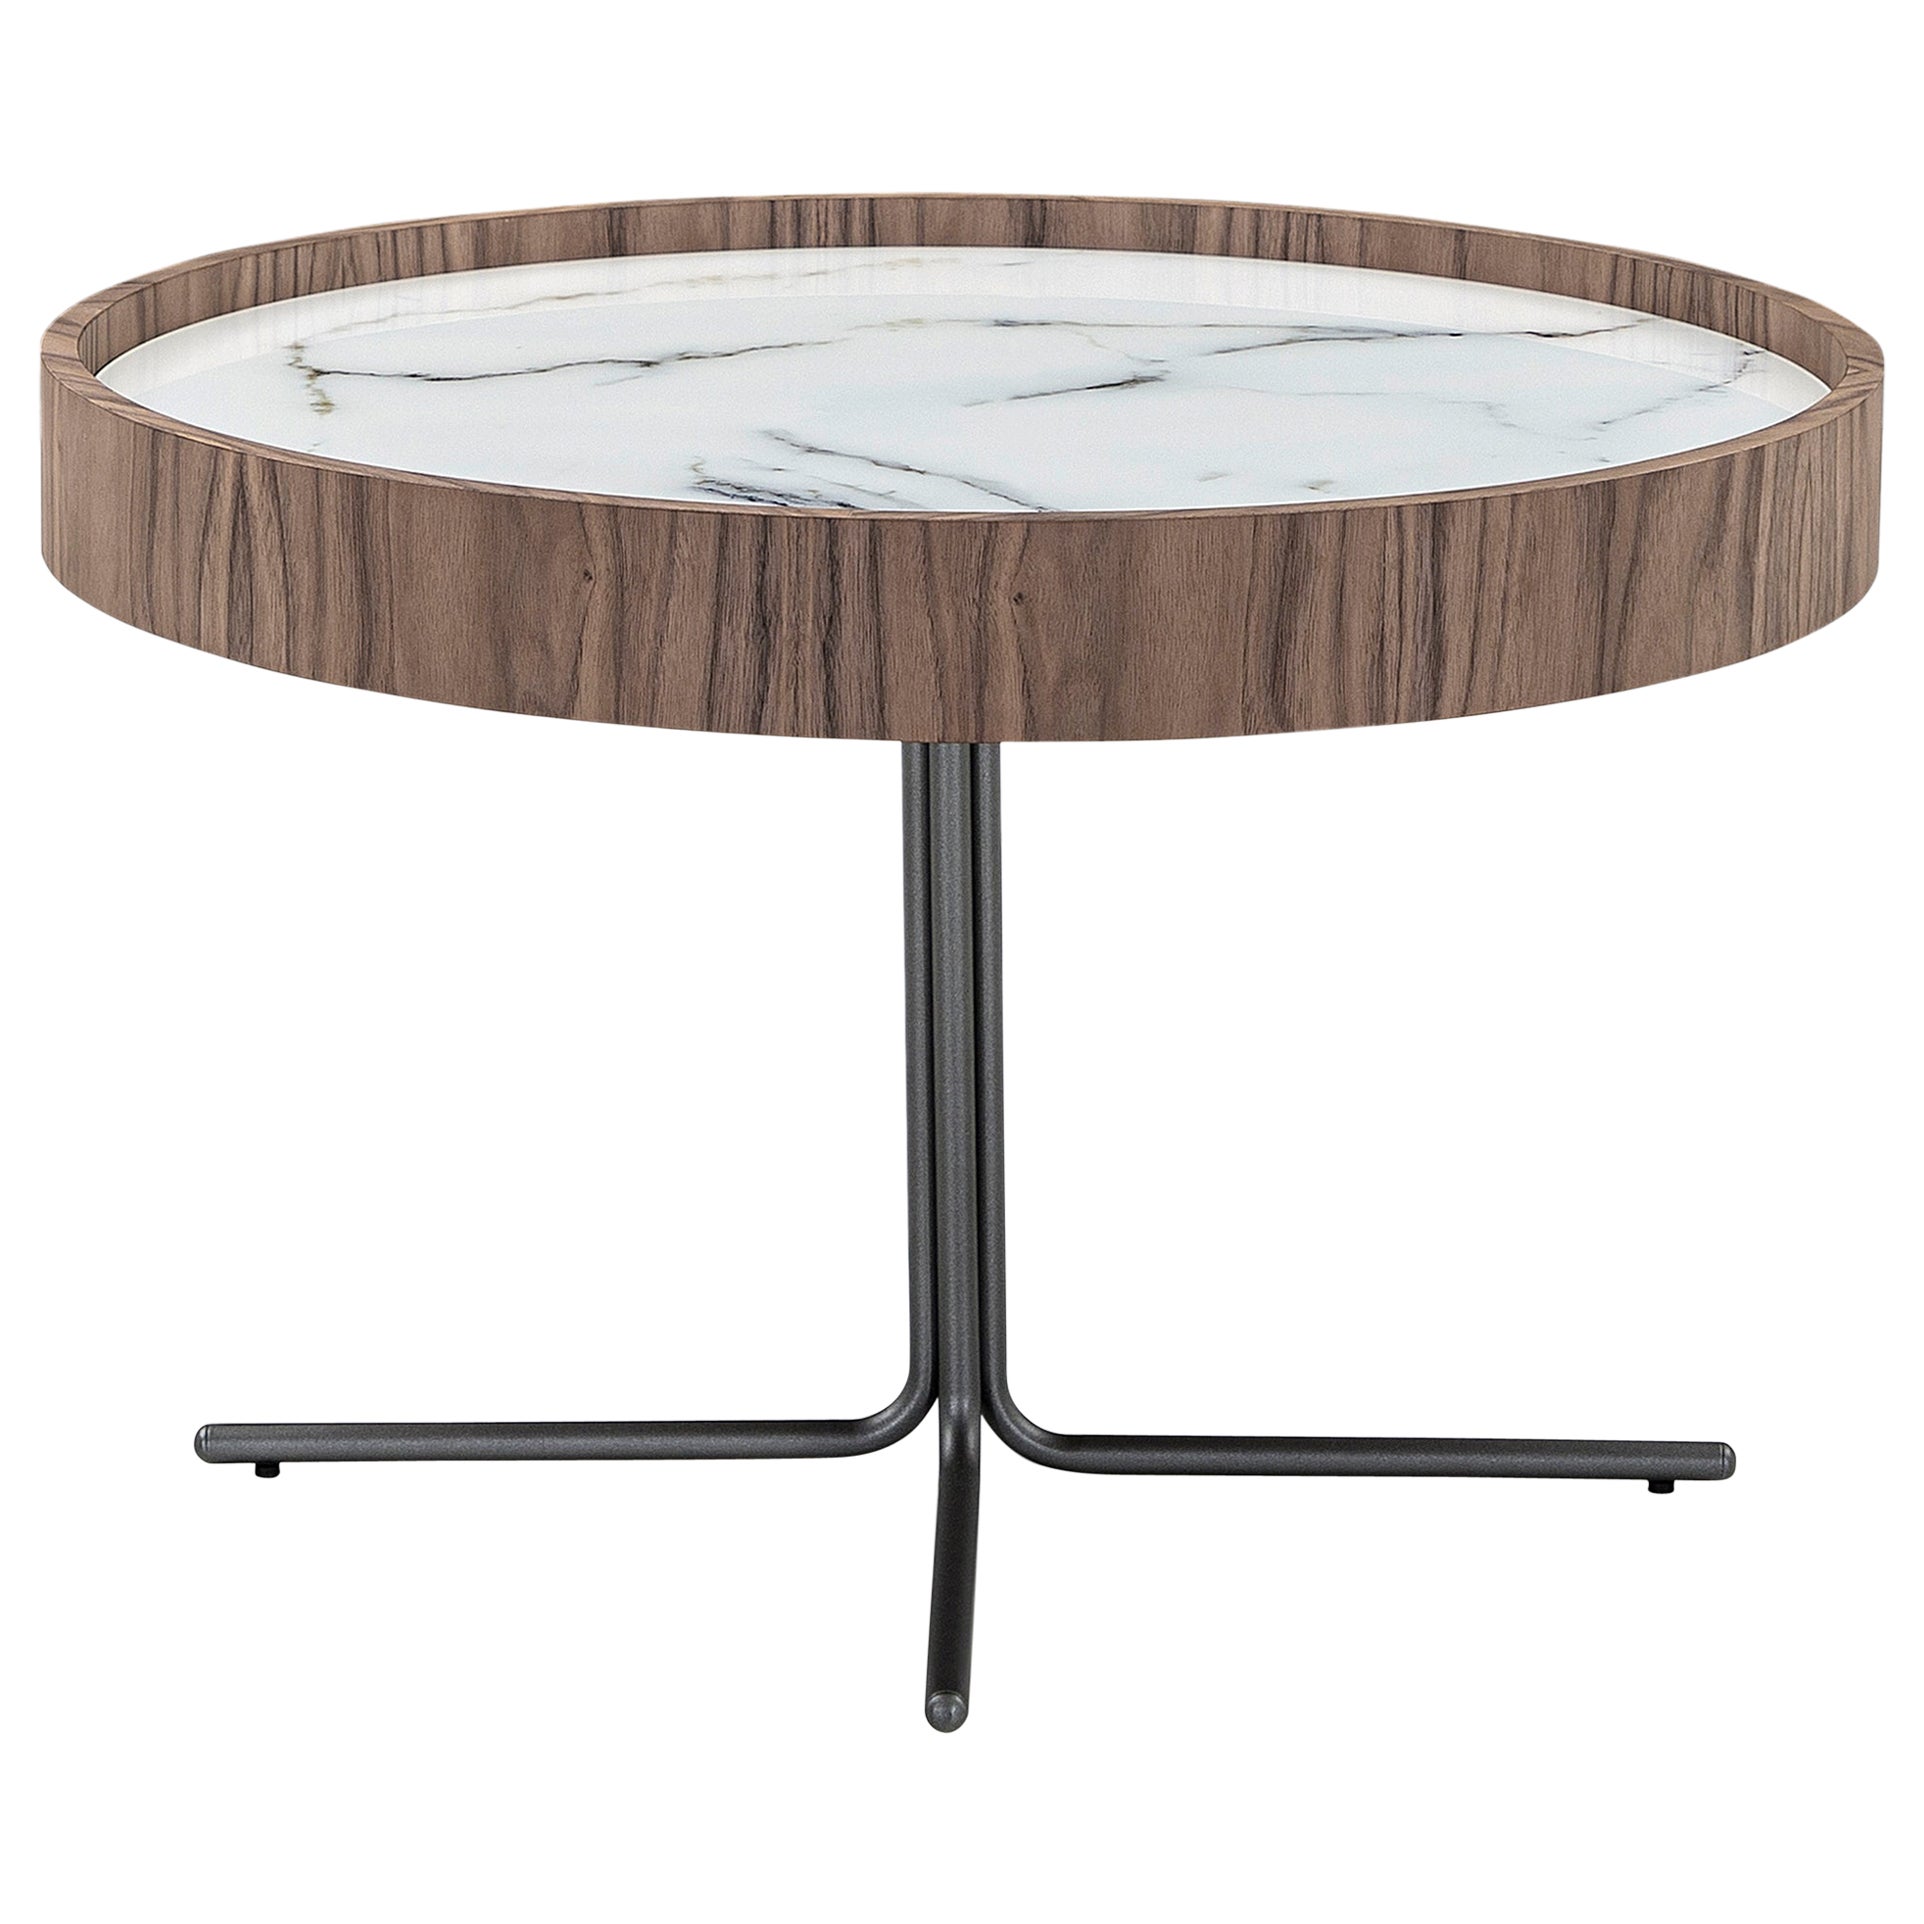 Regia Occasional Table in Walnut Wood Finish Featuring White Glass 26'' For Sale